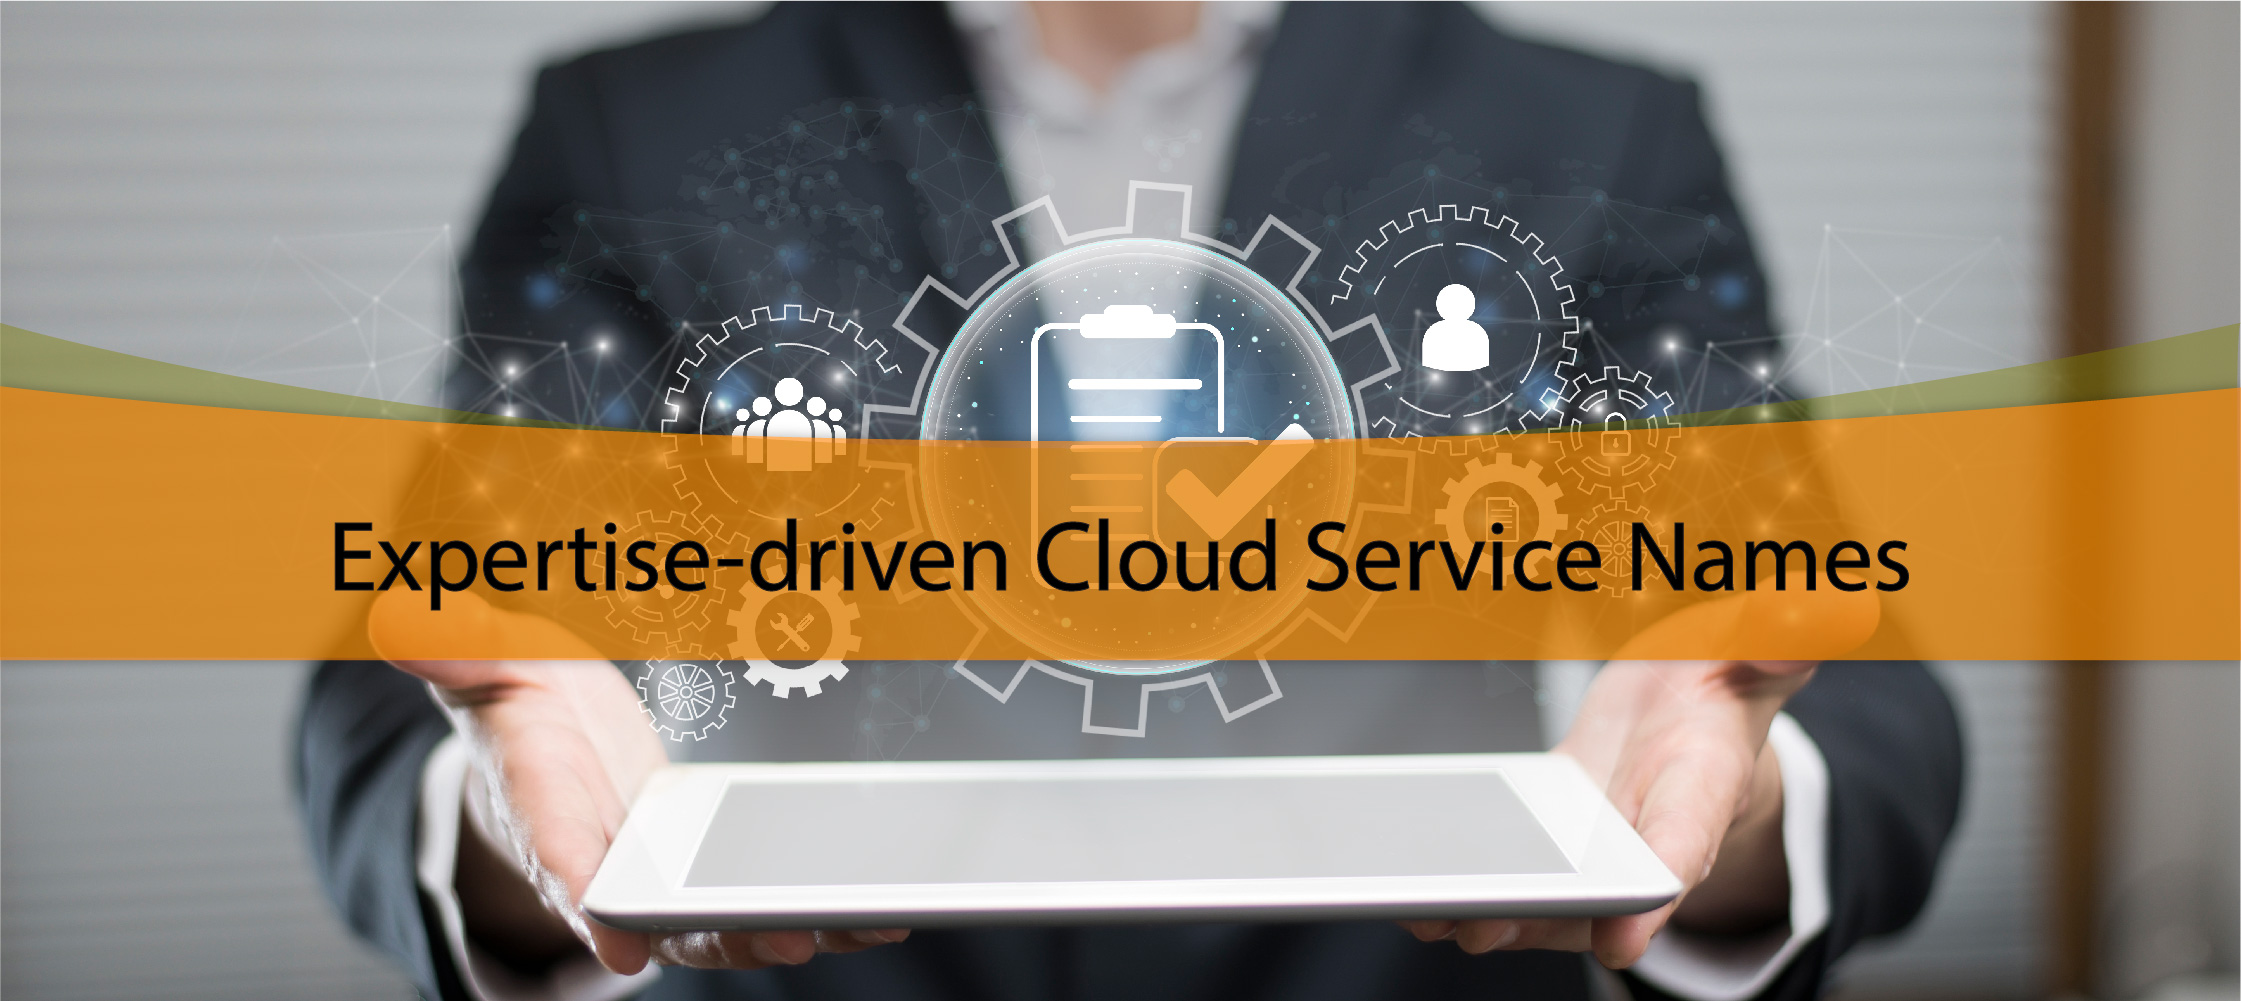 Expertise-driven Cloud Service Names